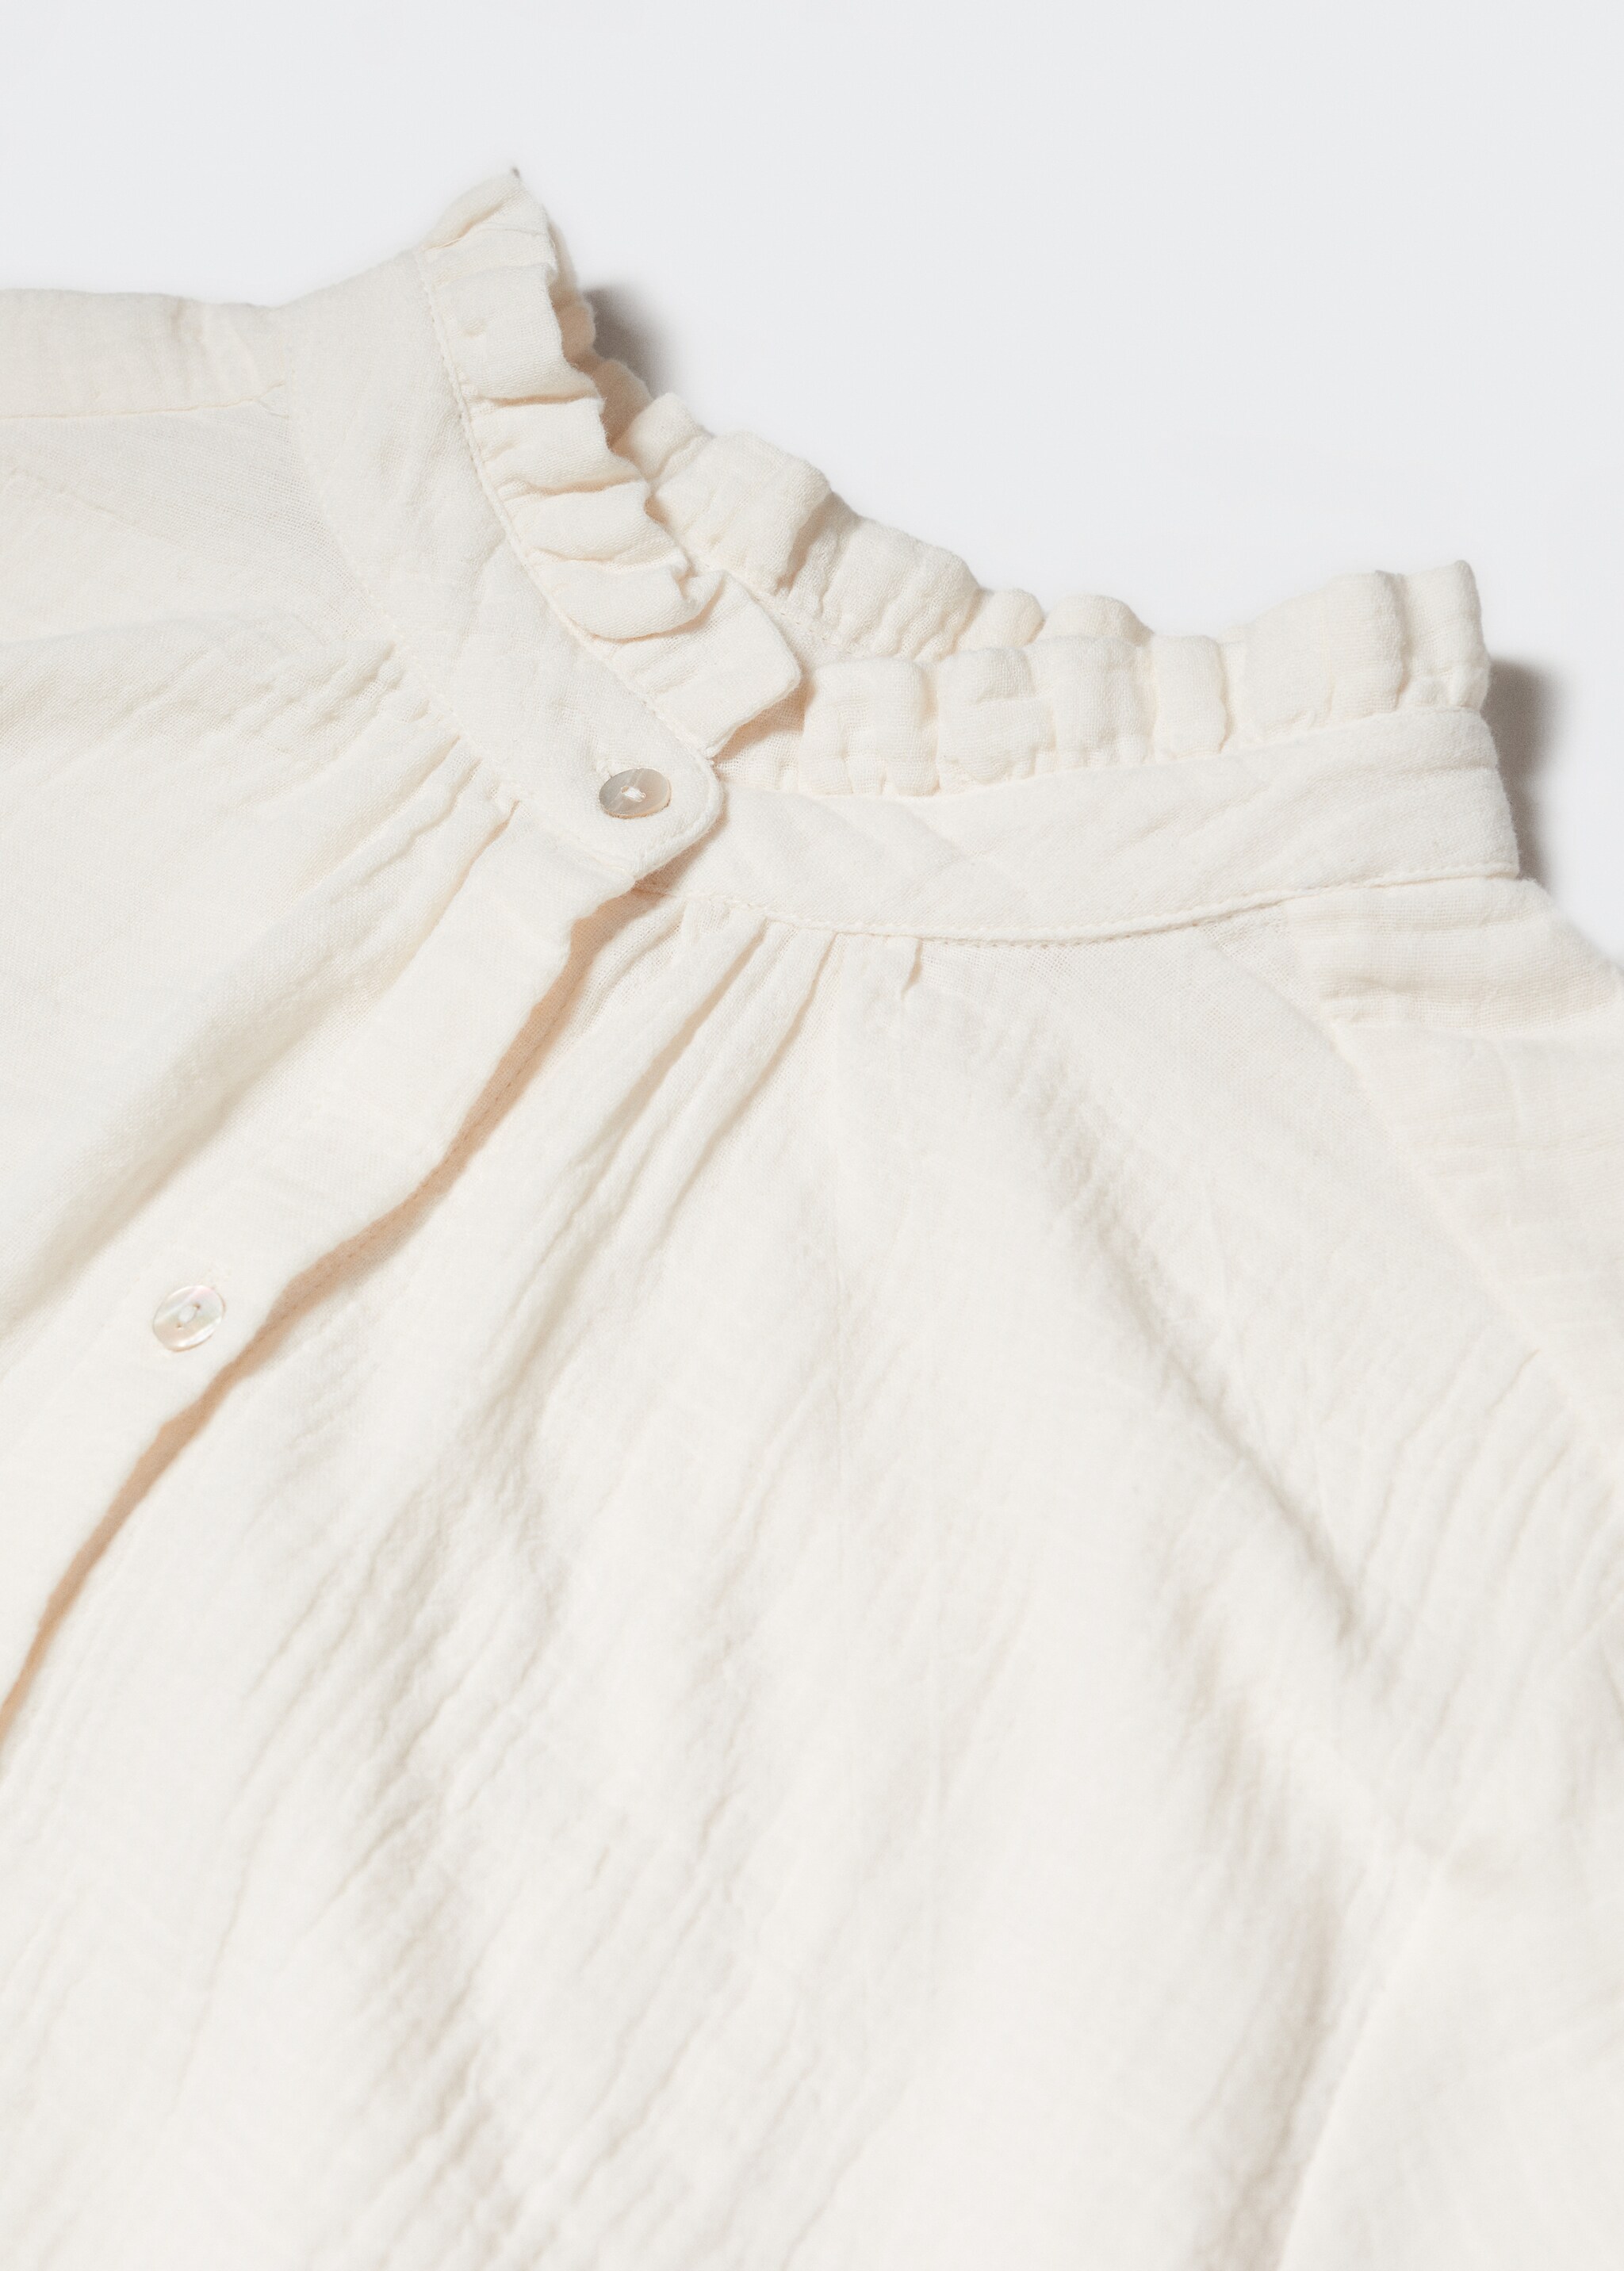 Textured oversize shirt - Details of the article 8